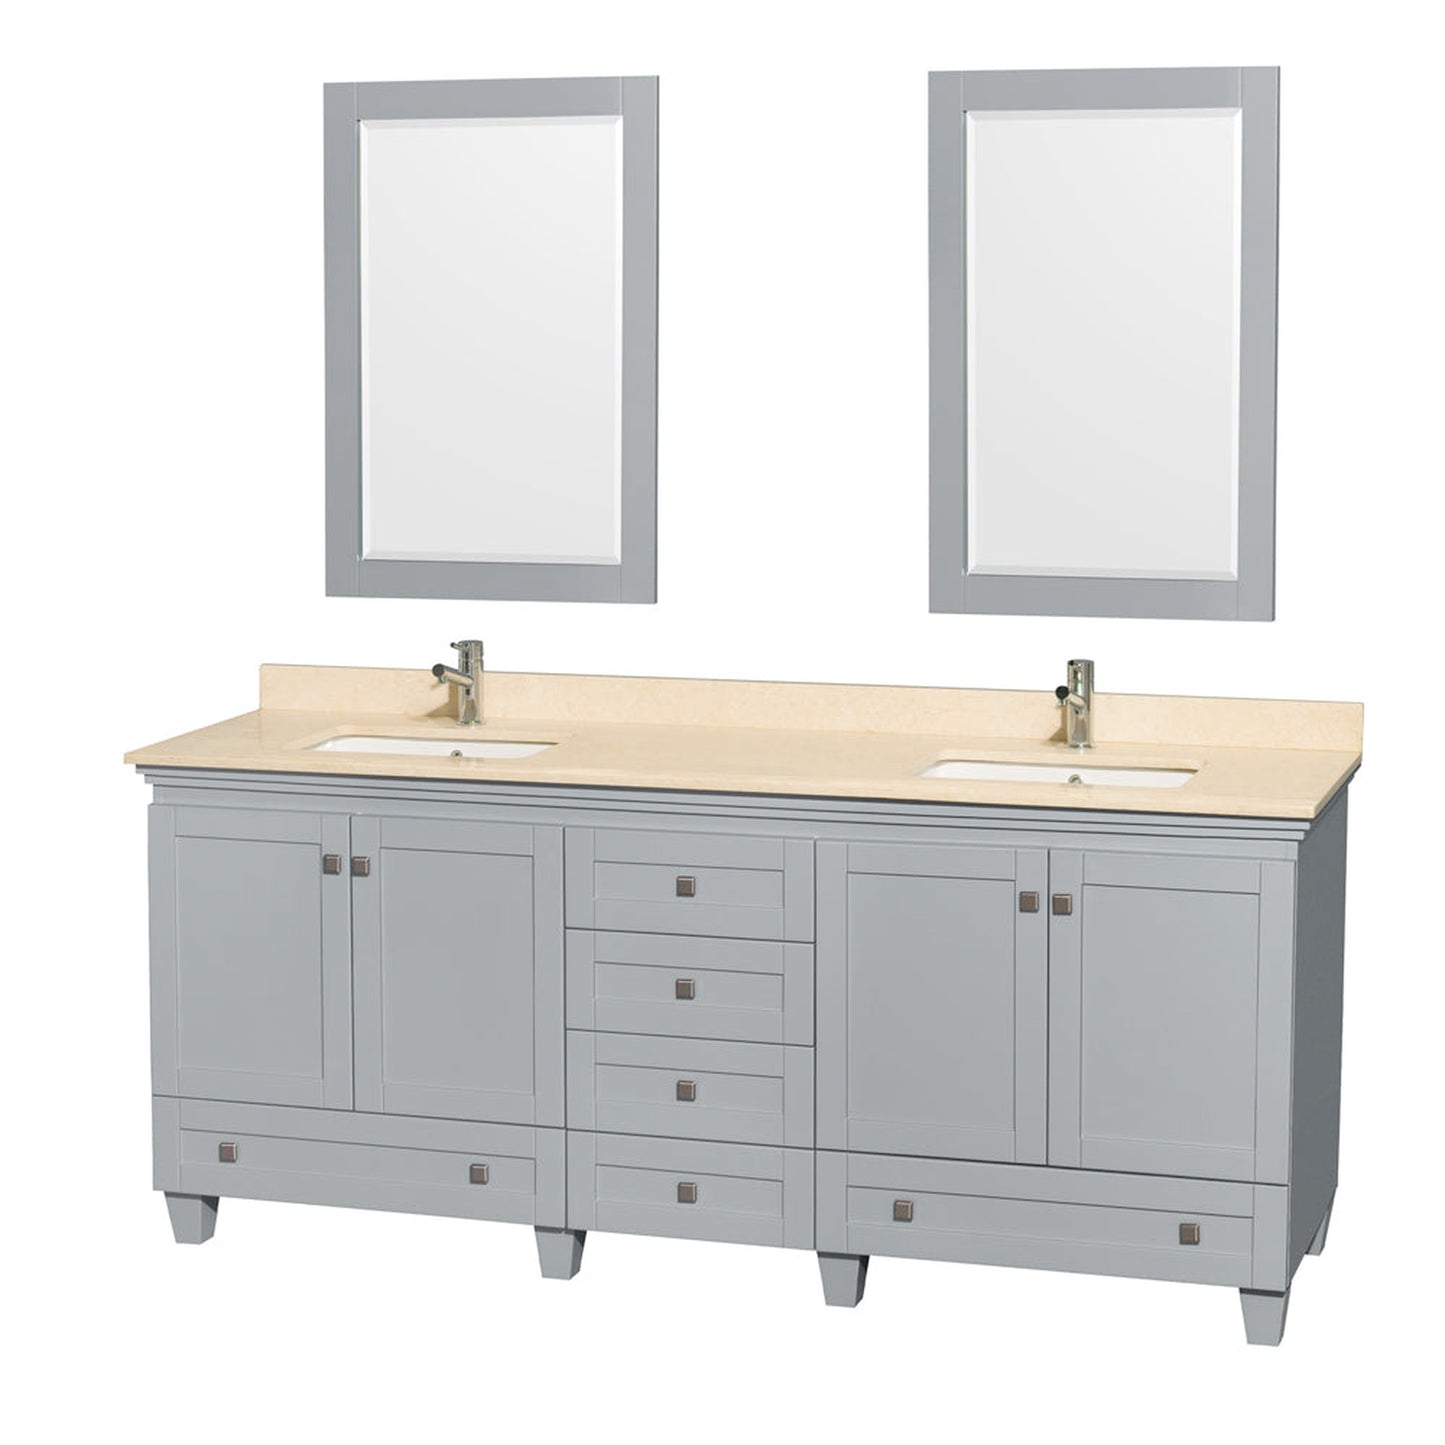 Wyndham Collection Acclaim 80" Double Bathroom Vanity in Oyster Gray With Ivory Marble Countertop, Undermount Square Sink & 24" Mirror